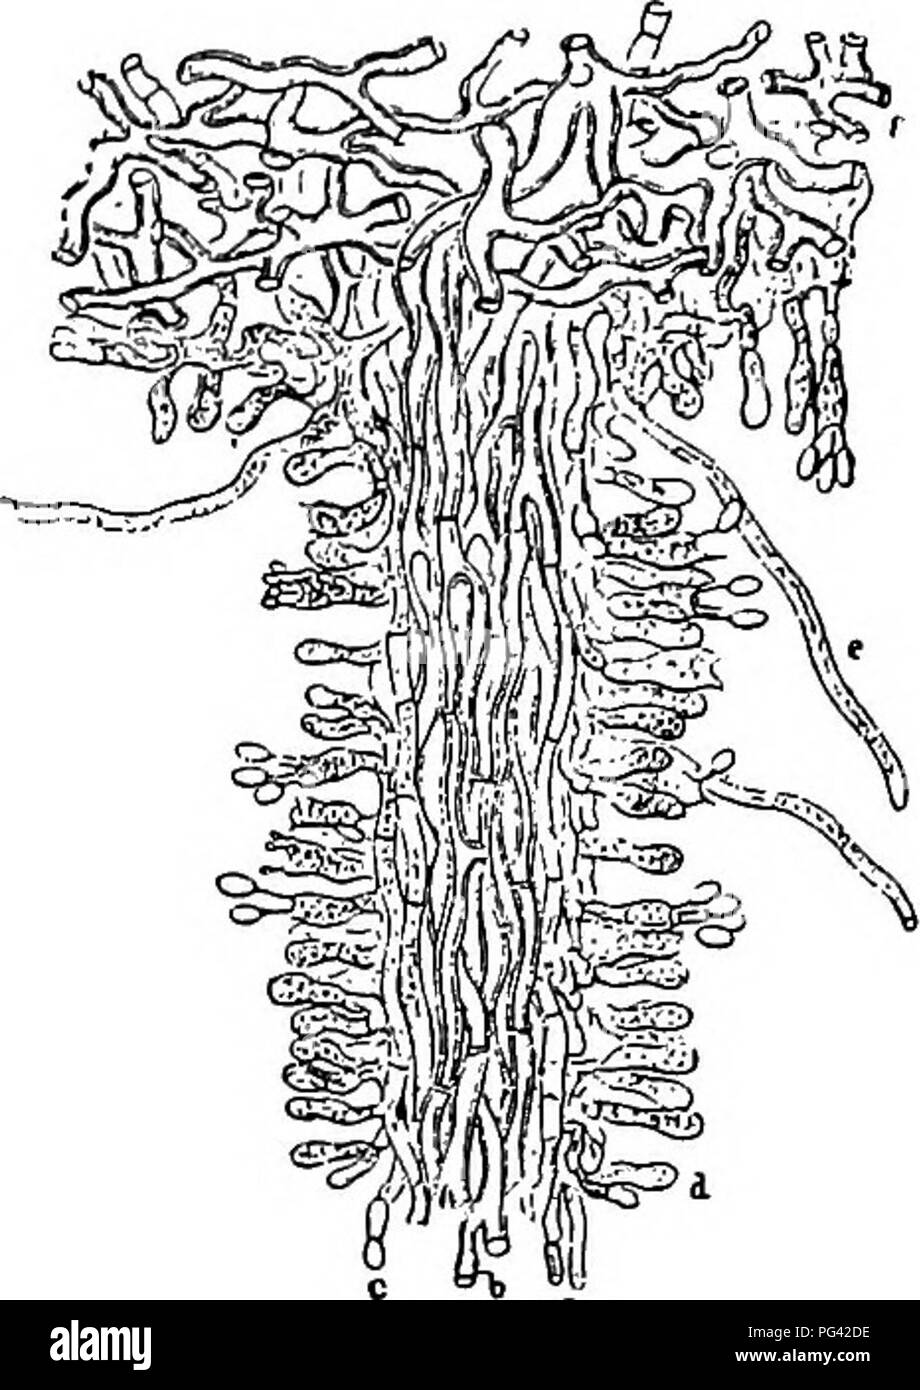 . Diseases of plants induced by cryptogamic parasites : introduction to the study of pathogenic Fungi, slime-Fungi, bacteria, &amp; Algae . Plant diseases; Parasitic plants; Fungi. POLYPOKUS. 439 Seynes,^ three other kinds of spores are produced in addition to basidiospores. Willow, poplar, oak, sweet chest- nut, alder, ash, hazel, pear, cherry, robinia, larch, silver fir, etc., are common hosts of this parasite. Wood infested by the mycelium darkens in colour, exhibiting a red- rot. Vessels and all clefts or spaces become filled with white felted masses of mycelium. The wood, in course of des Stock Photo